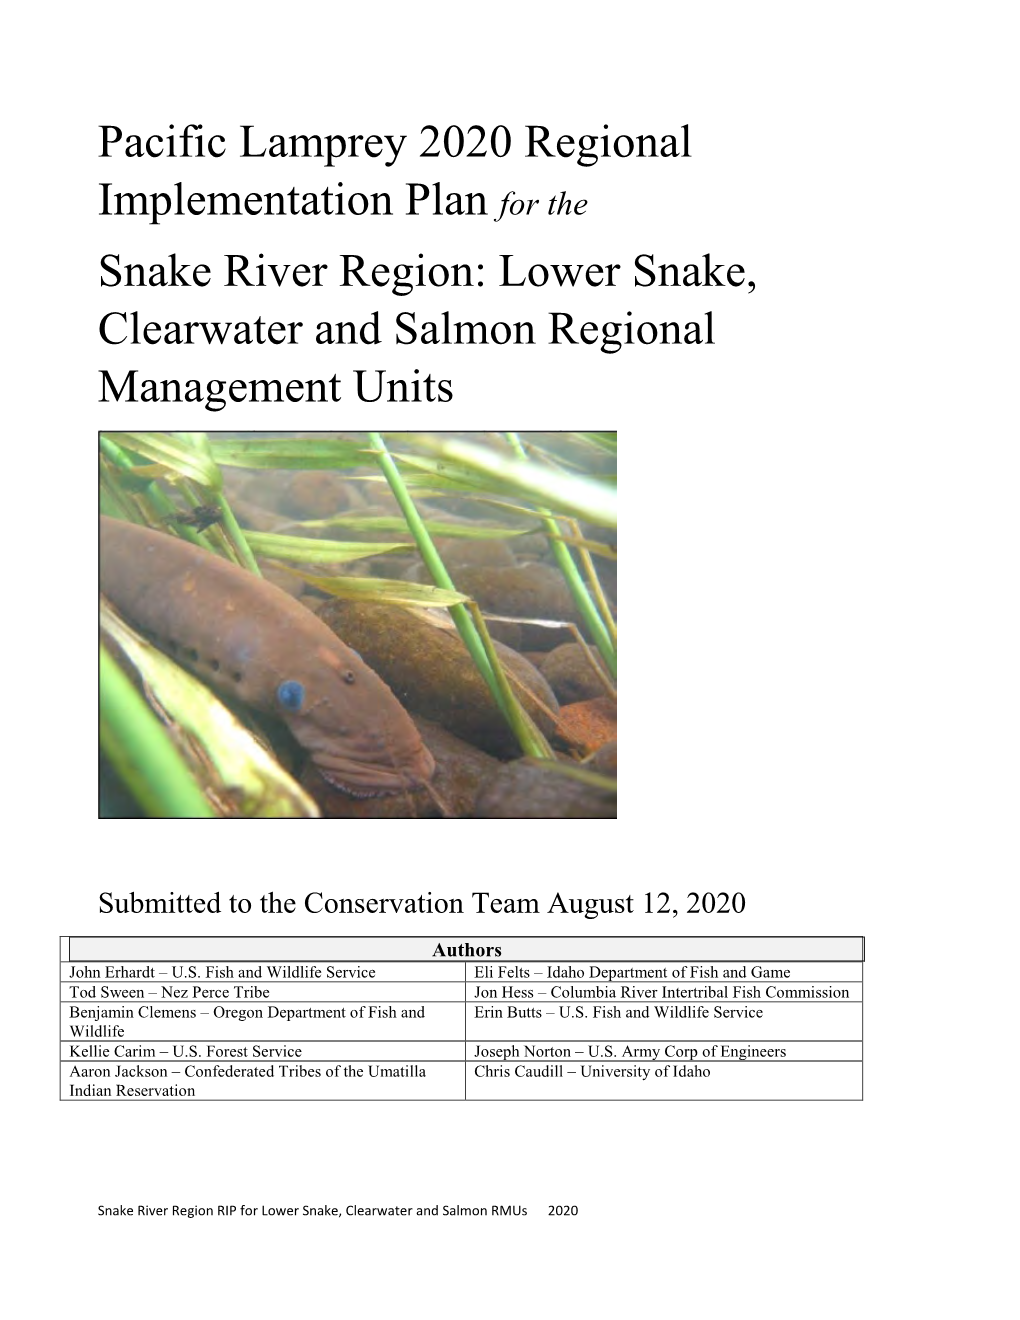 Pacific Lamprey 2020 Regional Implementation Plan for the Snake River Region: Lower Snake, Clearwater and Salmon Regional Management Units